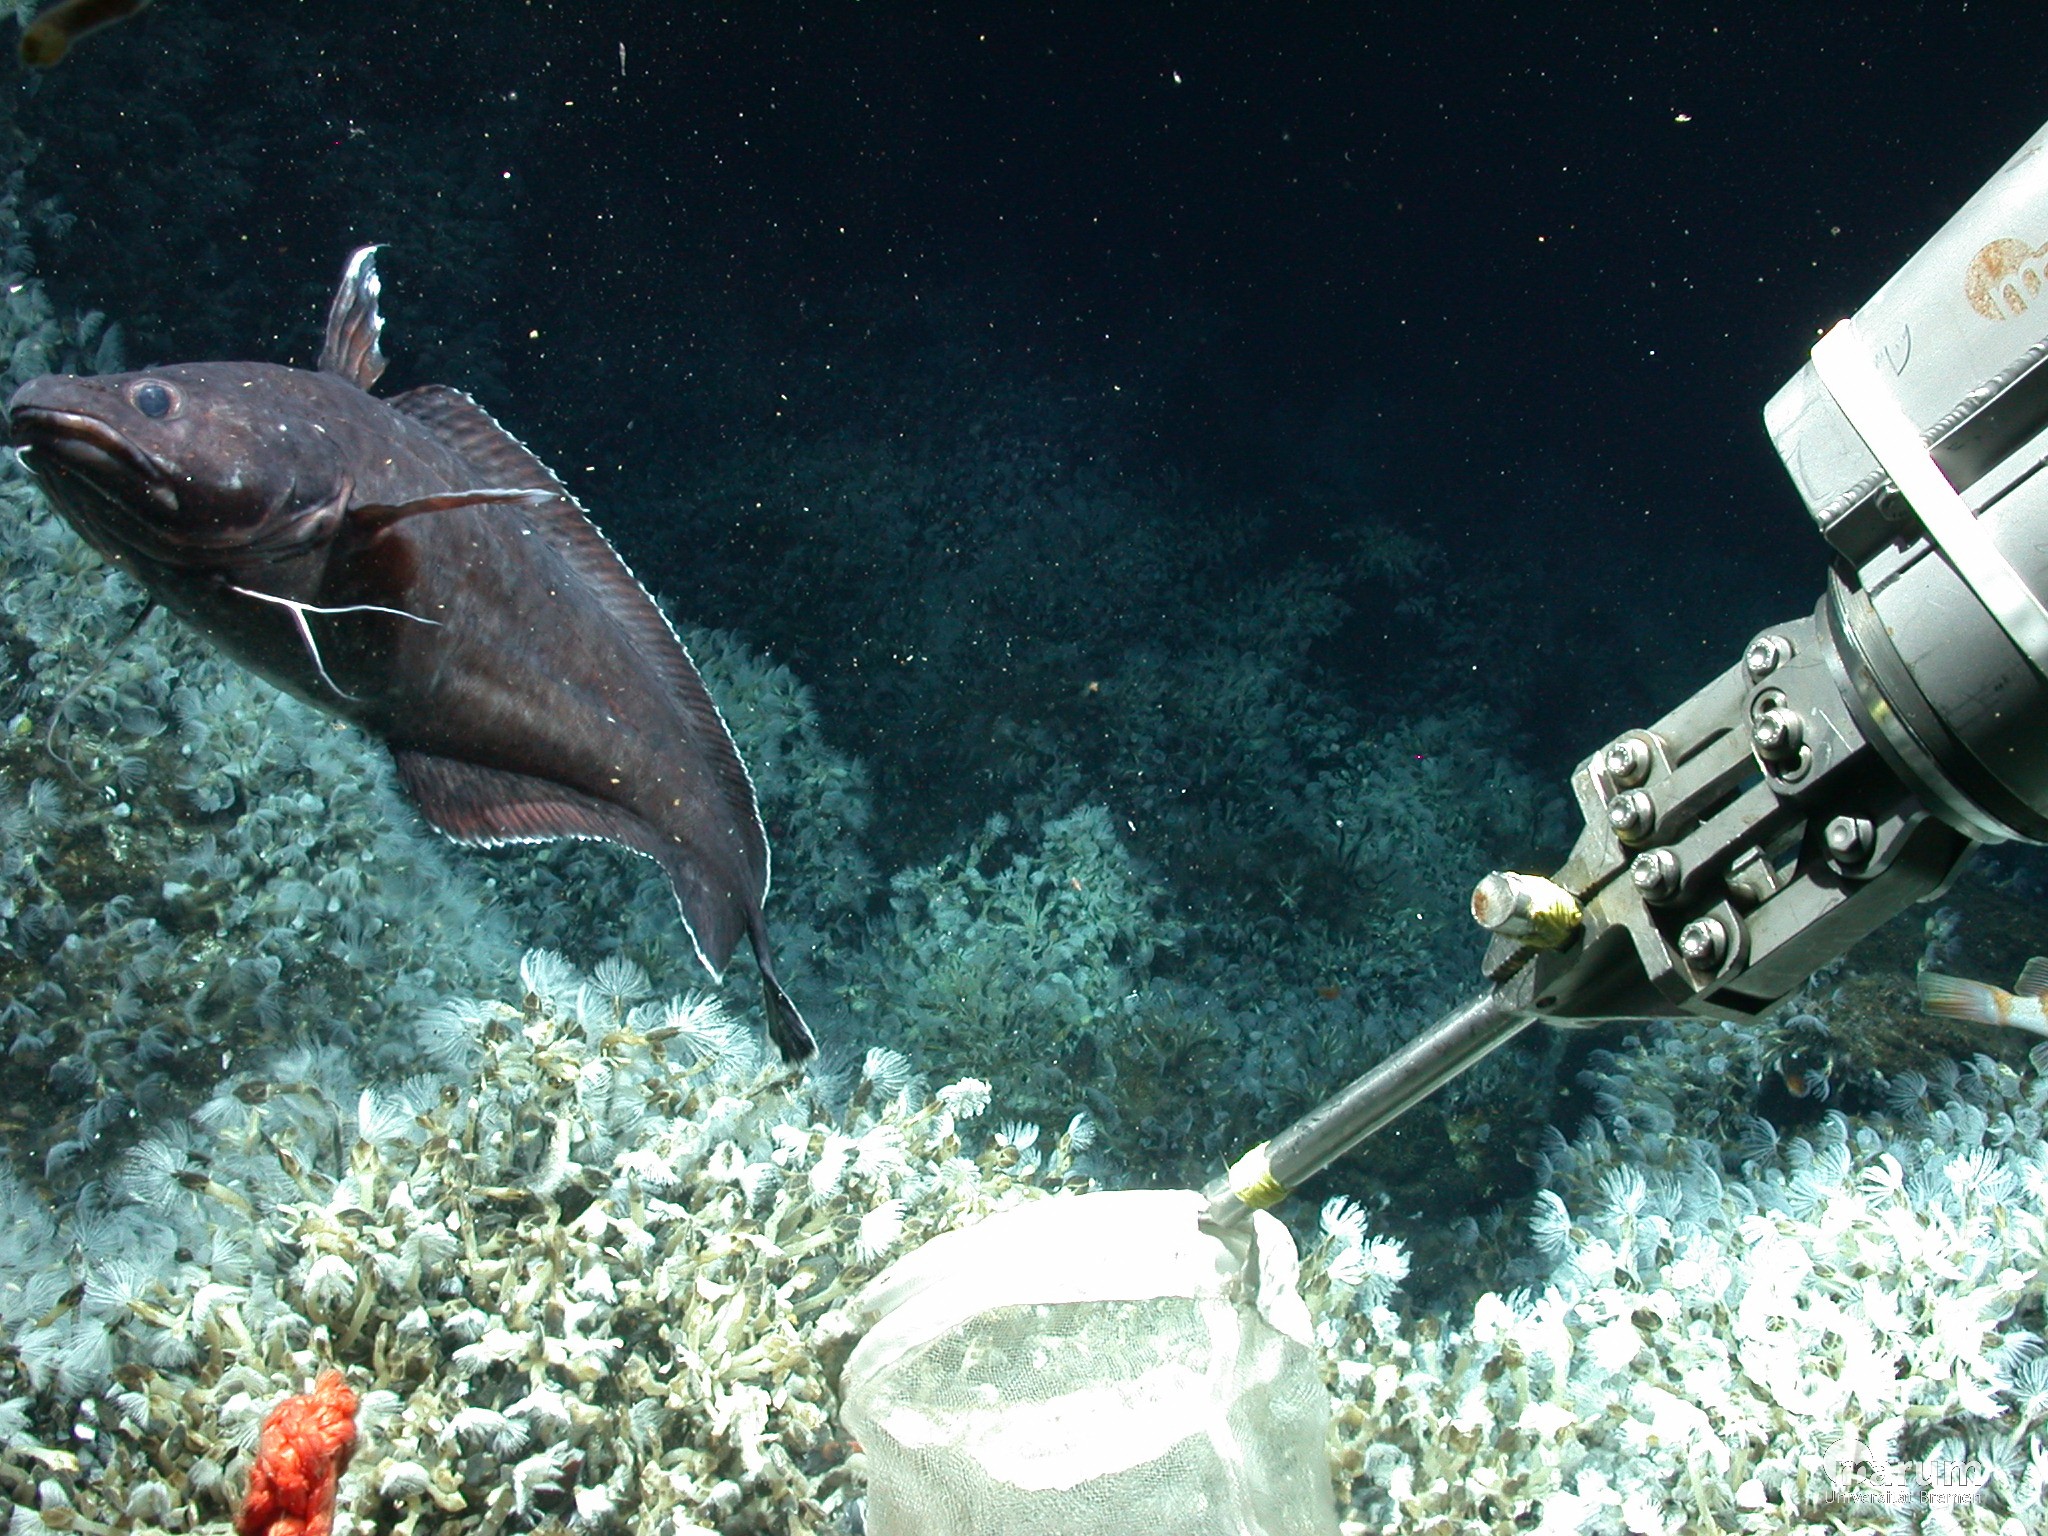 The Remotely Operated Vehicle ROV Quest (MARUM) takes samples of fauna in a hydrothermally active field at the Haungaroa volcano (Source: MARUM,University of Bremen)